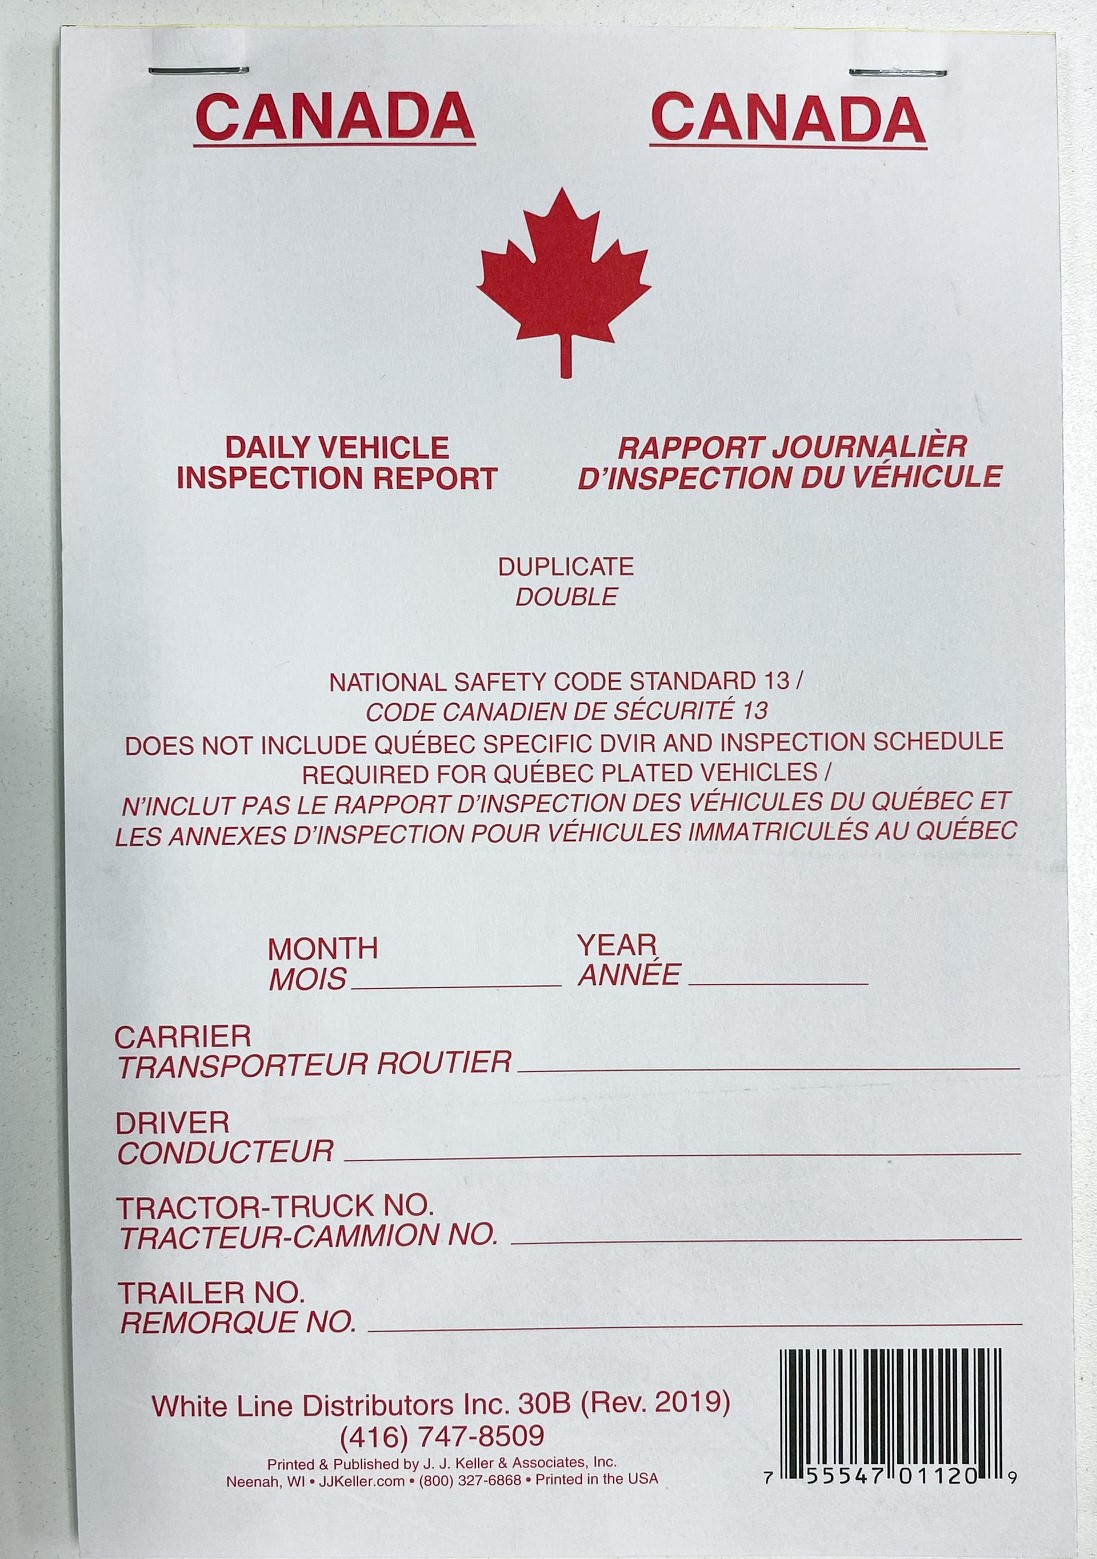 DAILY VEHICLE INSPECTION REPORT LOG BOOK - 30B